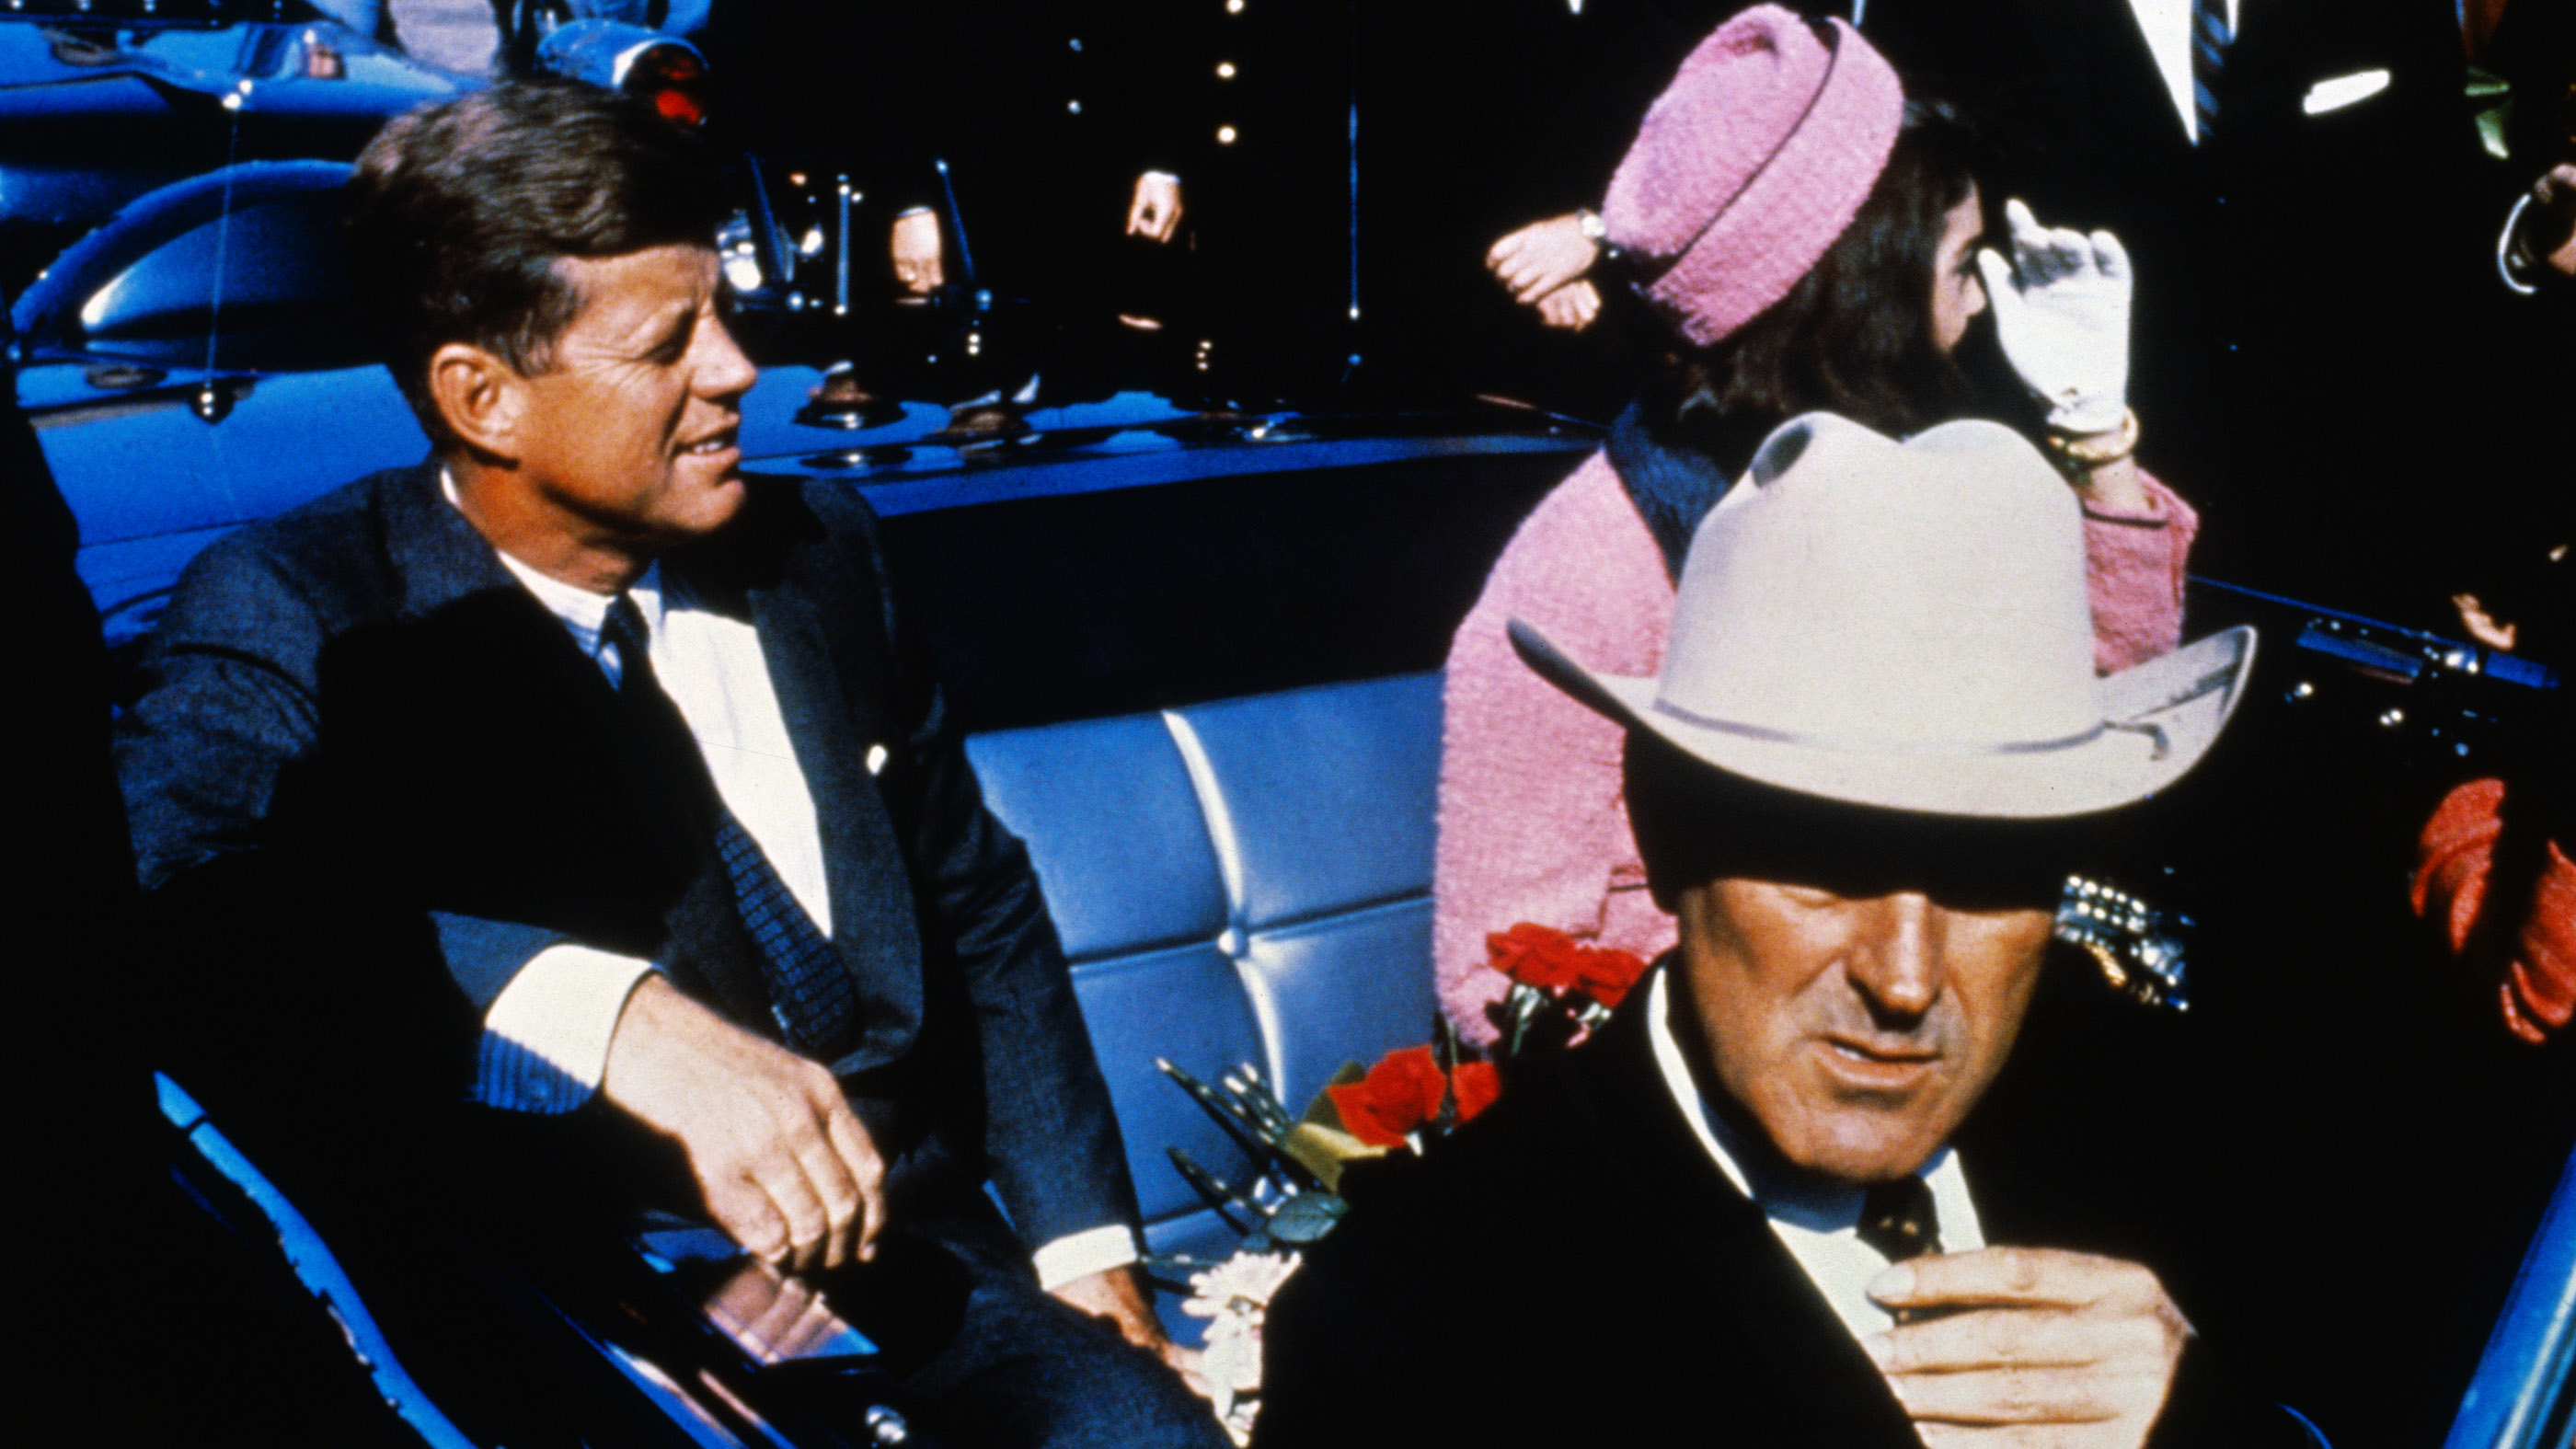 President John Kennedy rides in a motorcade from the Dallas airport into the city with his wife Jacqueline and Texas Governor John Connally.